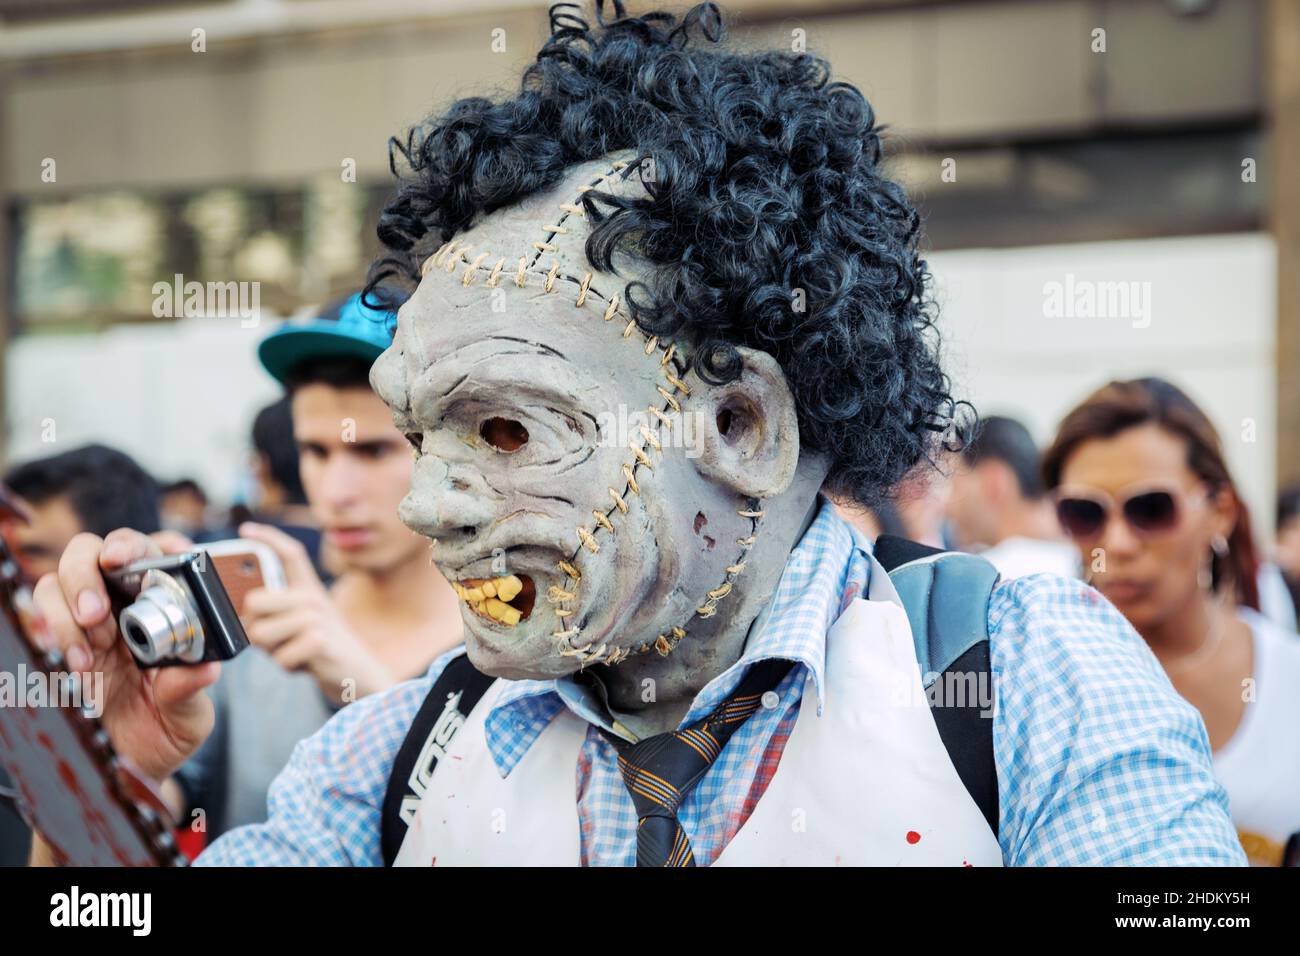 Sao Paulo, Brazil. 2nd November, 2013. A person dressed up as a zombie attends the annual Zombie Walk in Sao Paulo, Brazil. Stock Photo